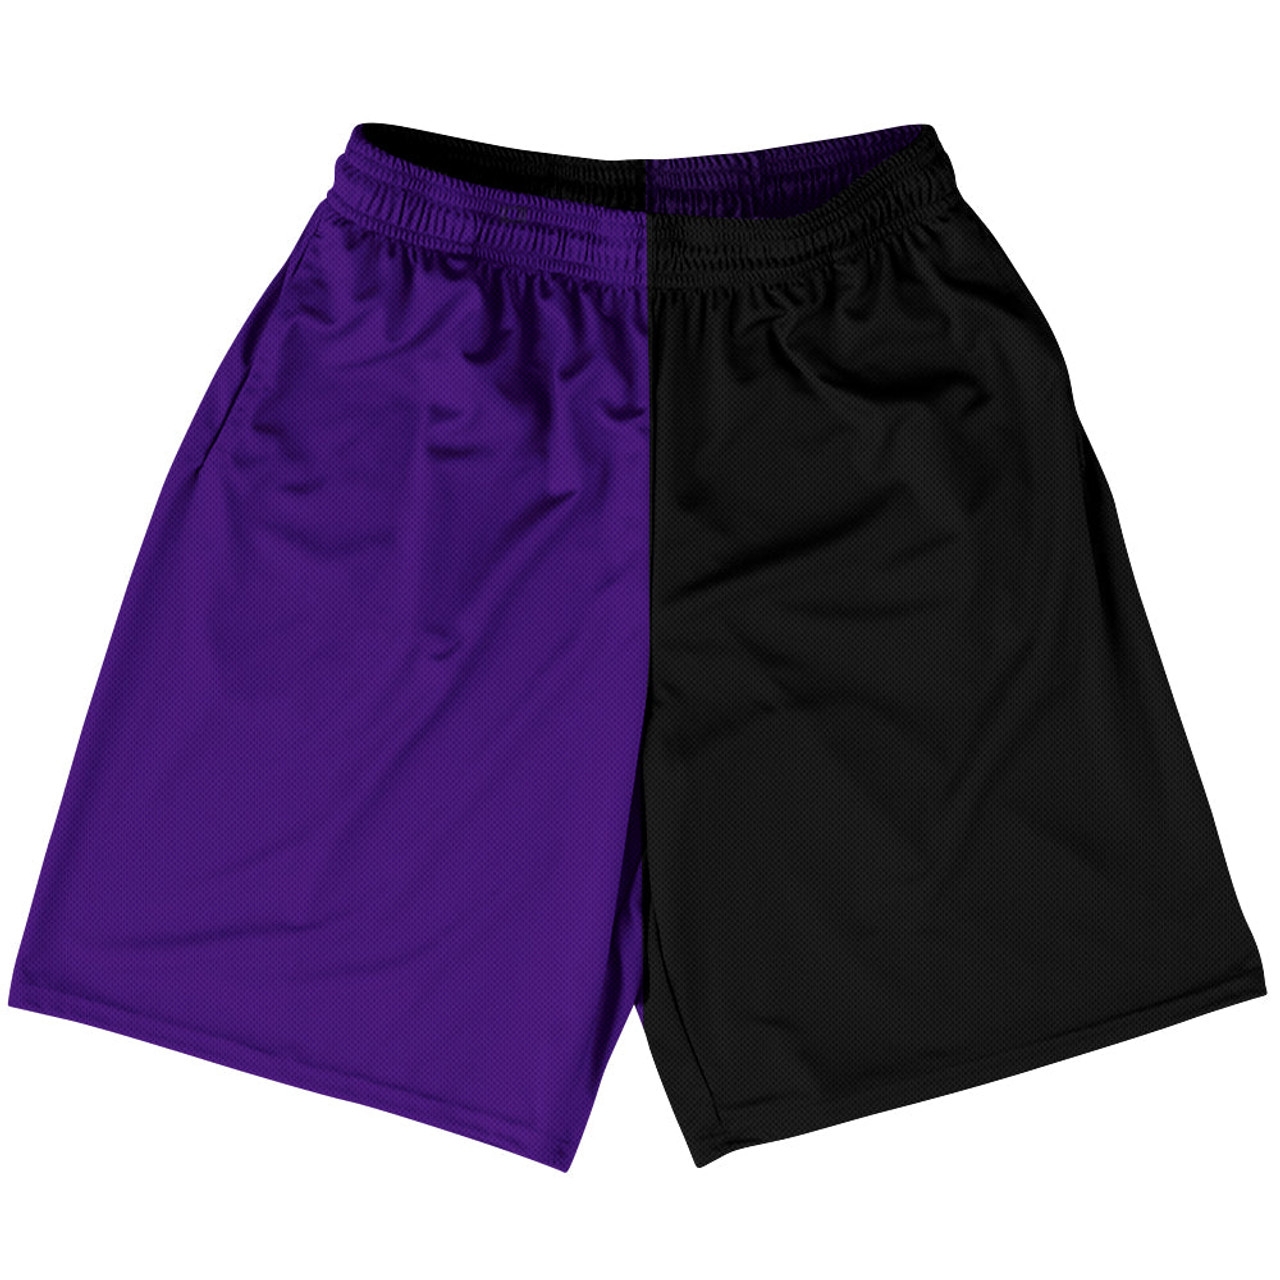 Purple Lakers and Black Quad Color BSB Practice Shorts Made in USA